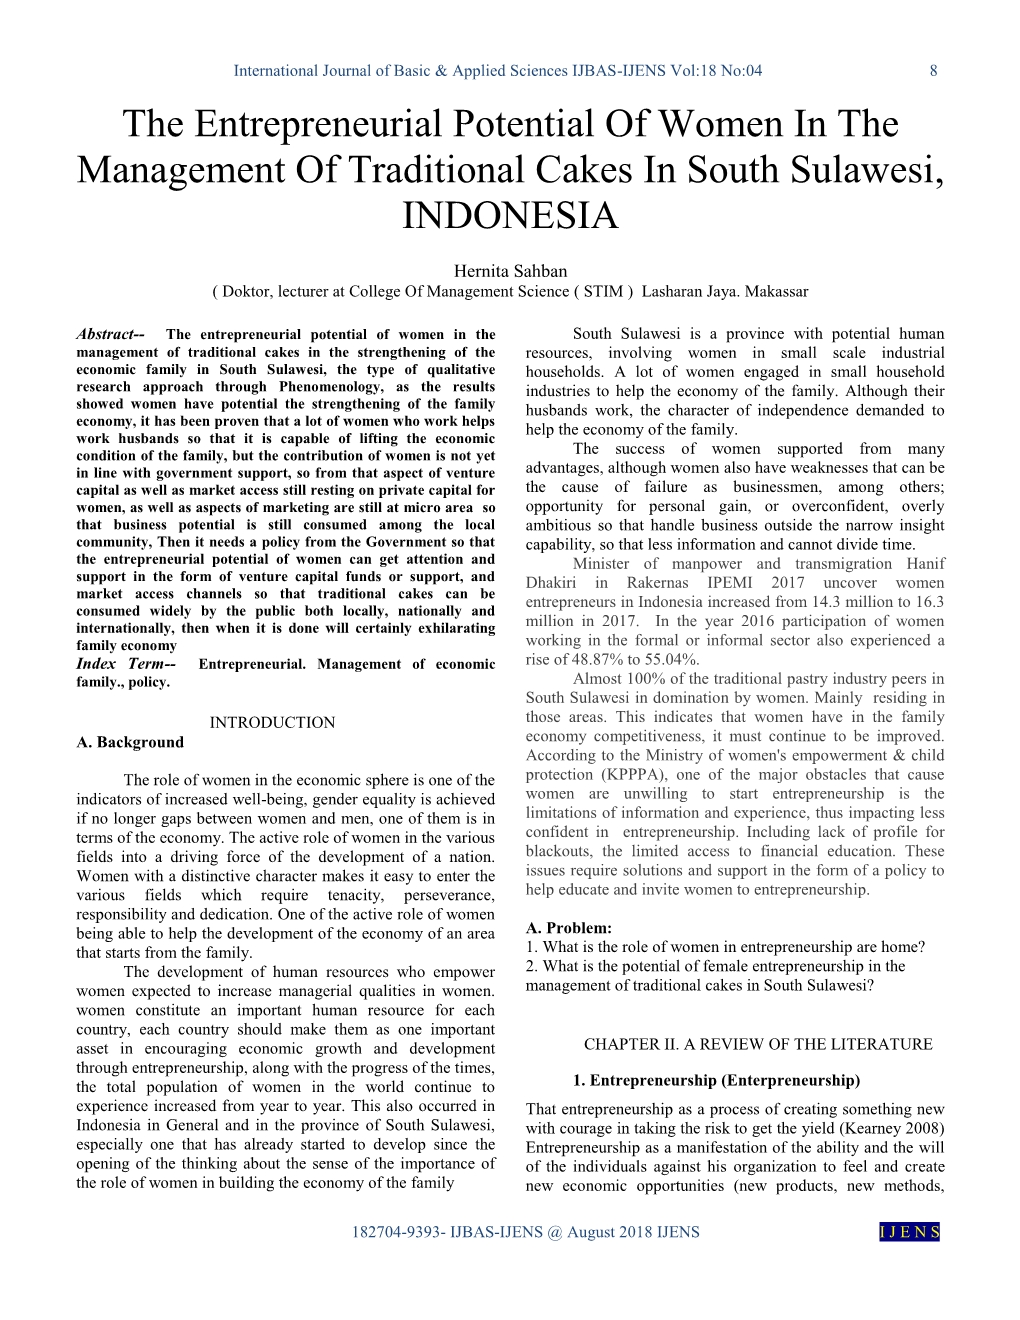 The Entrepreneurial Potential of Women in the Management of Traditional Cakes in South Sulawesi, INDONESIA